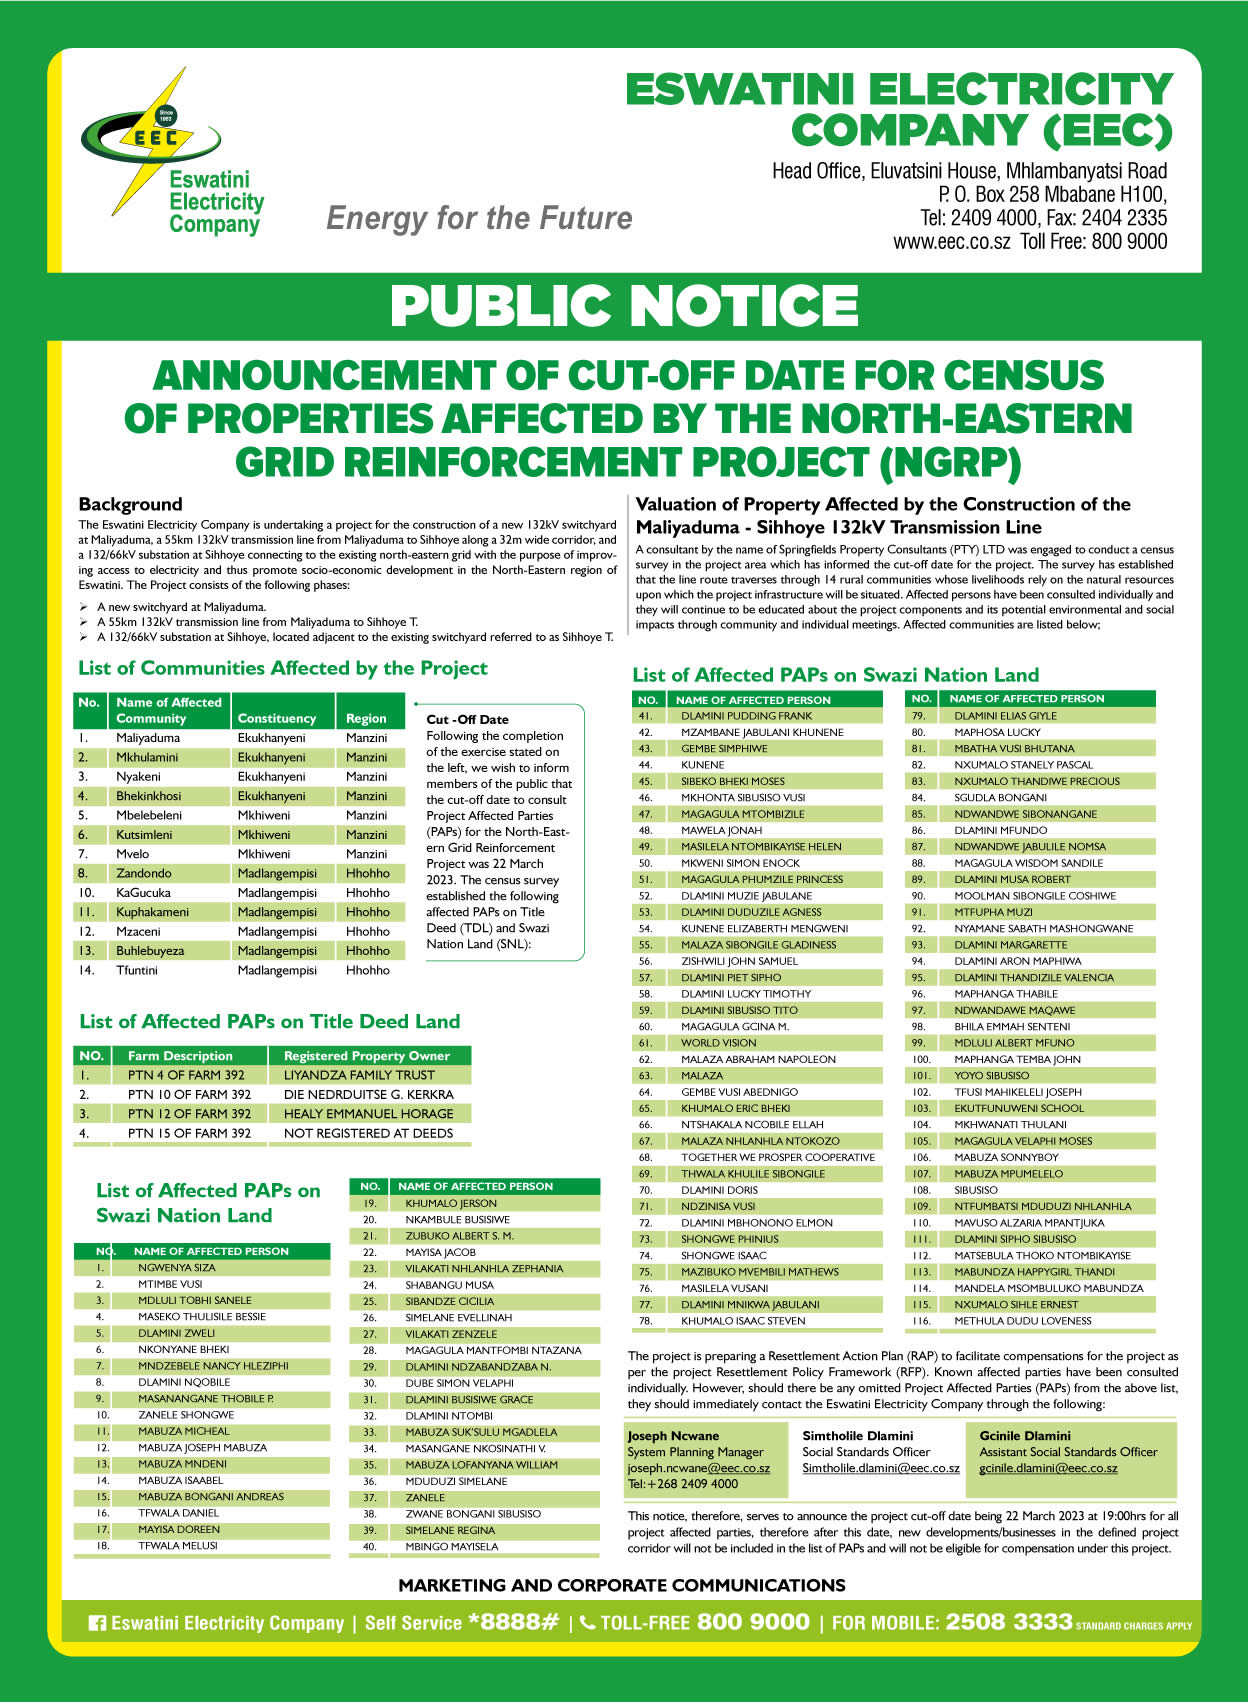 ANNOUNCEMENT OF CUT-OFF DATES FOR CENSUS OF PROPERTIES AFFECTED BY THE NORTHERN-EASTERN GRID REINFORCEMENT PROJECT (NGRP)